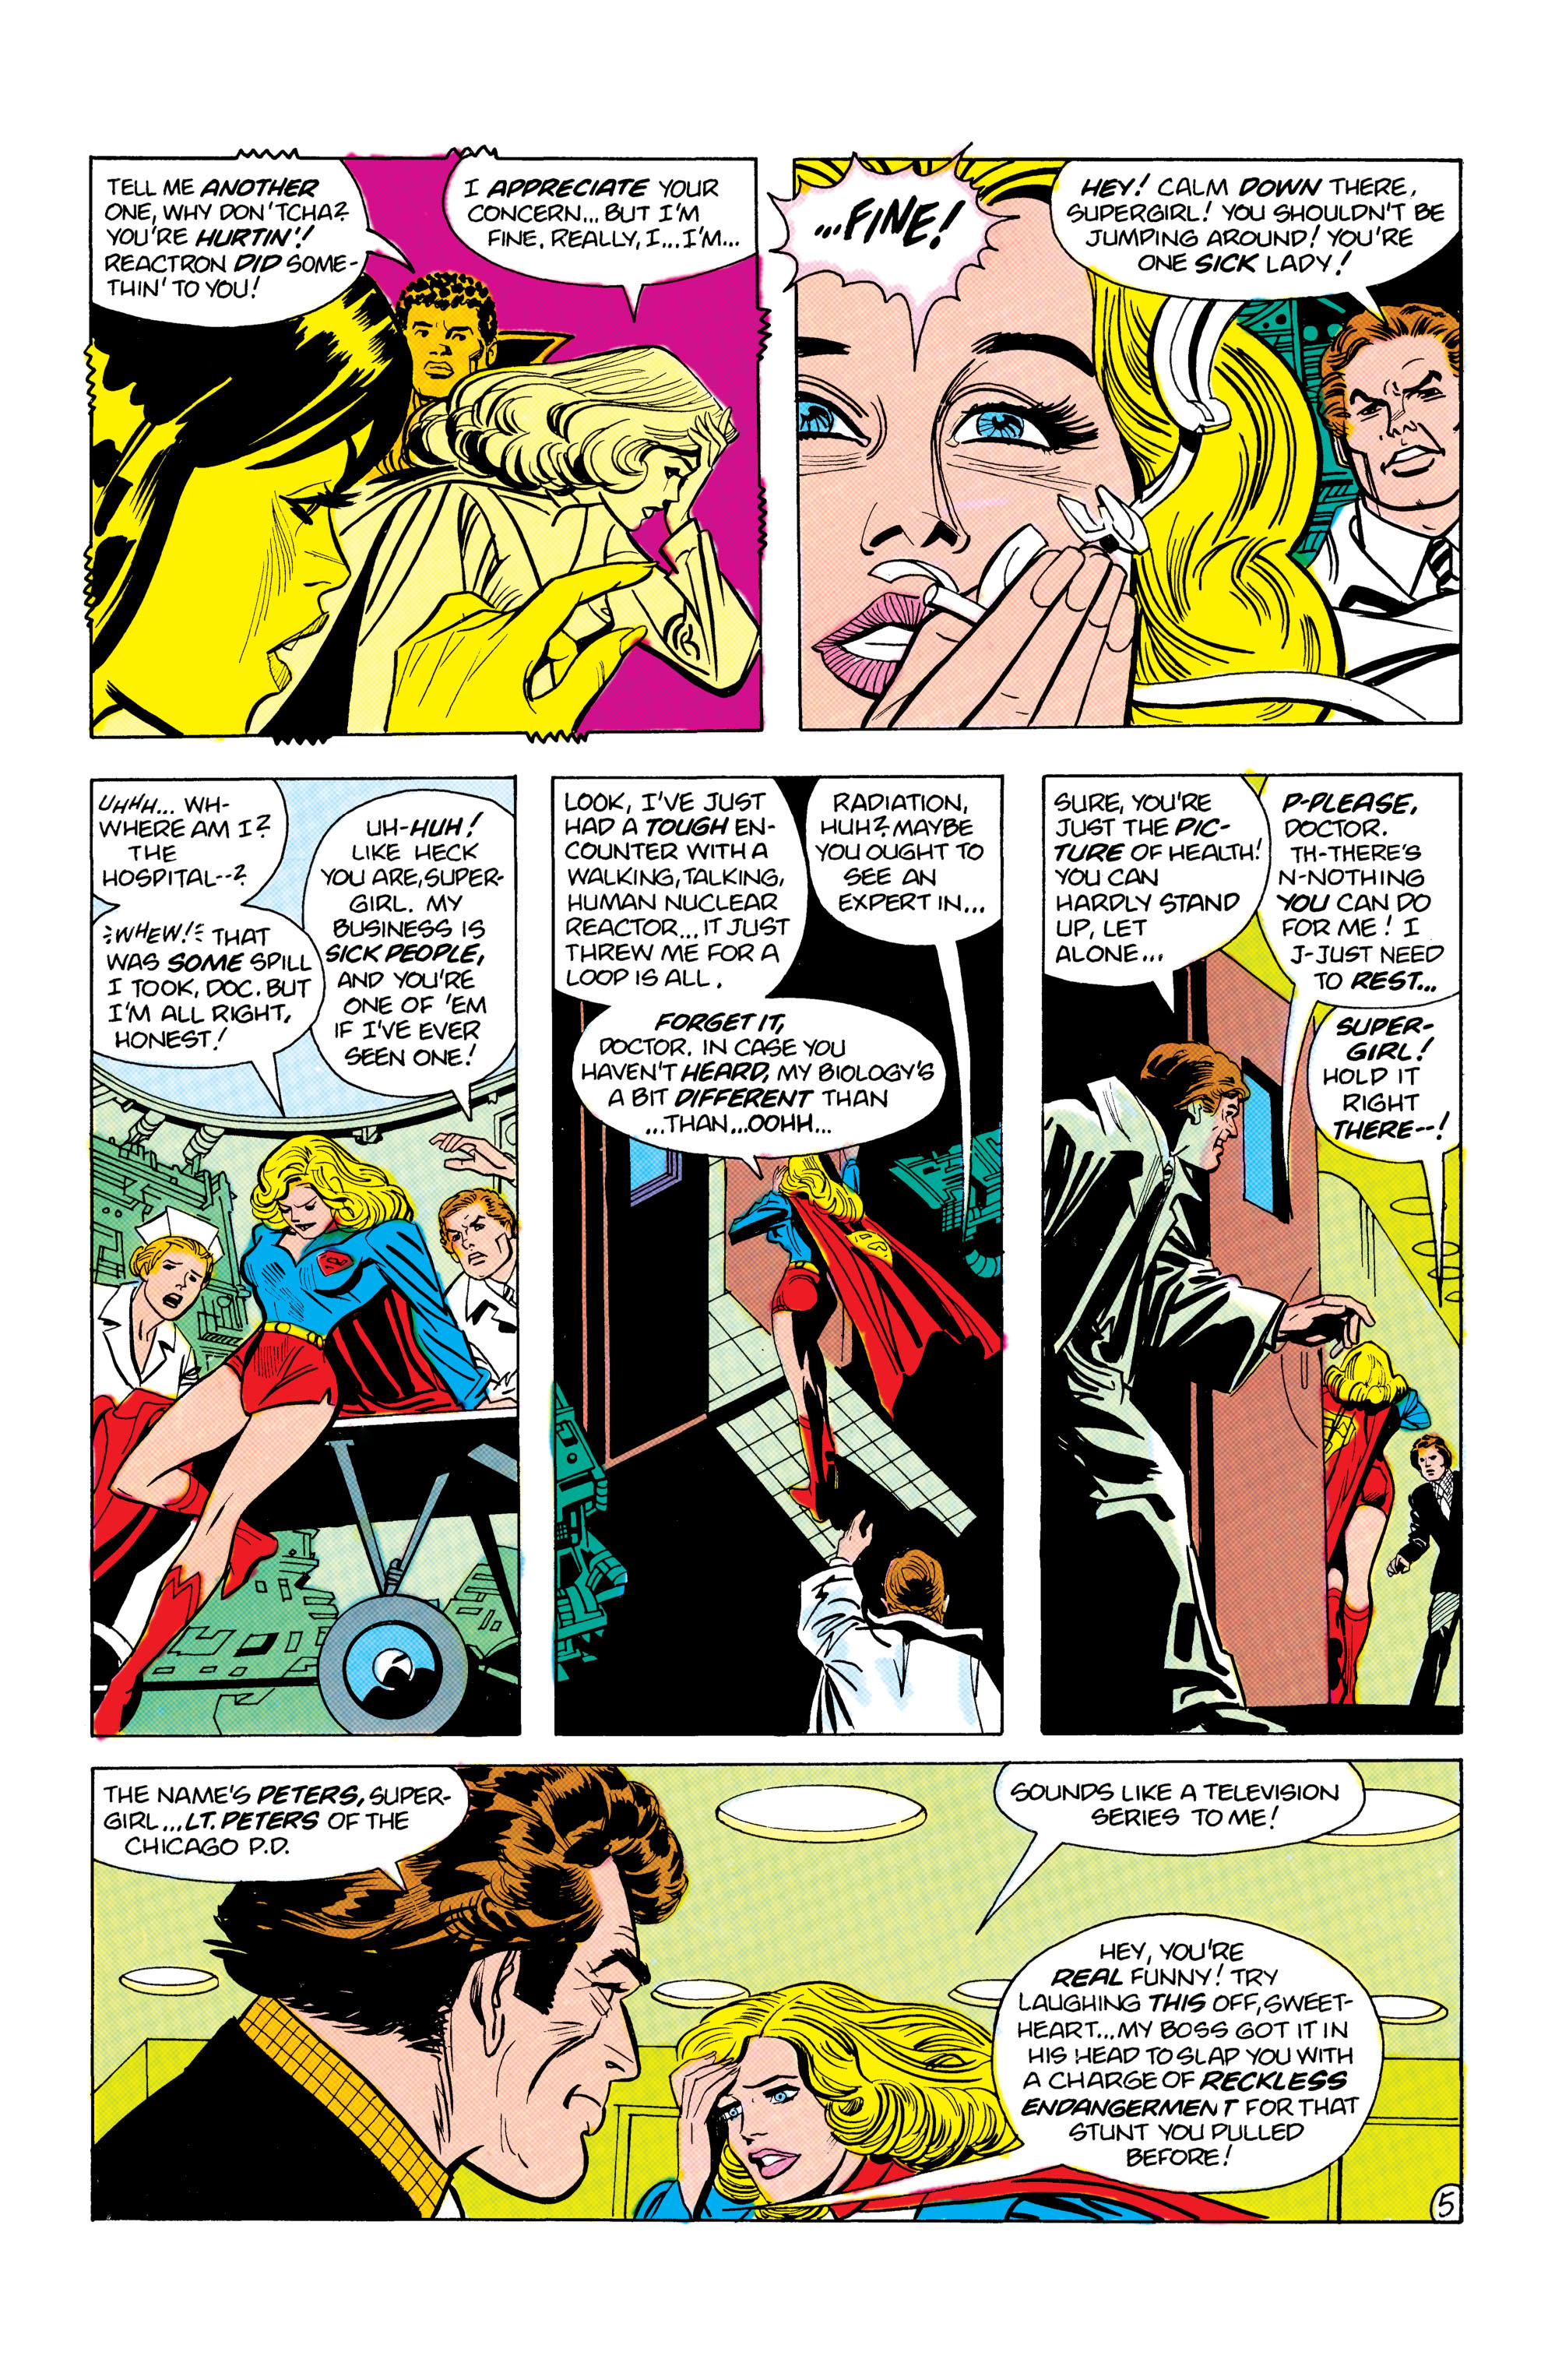 Supergirl (1982) 10 Page 5